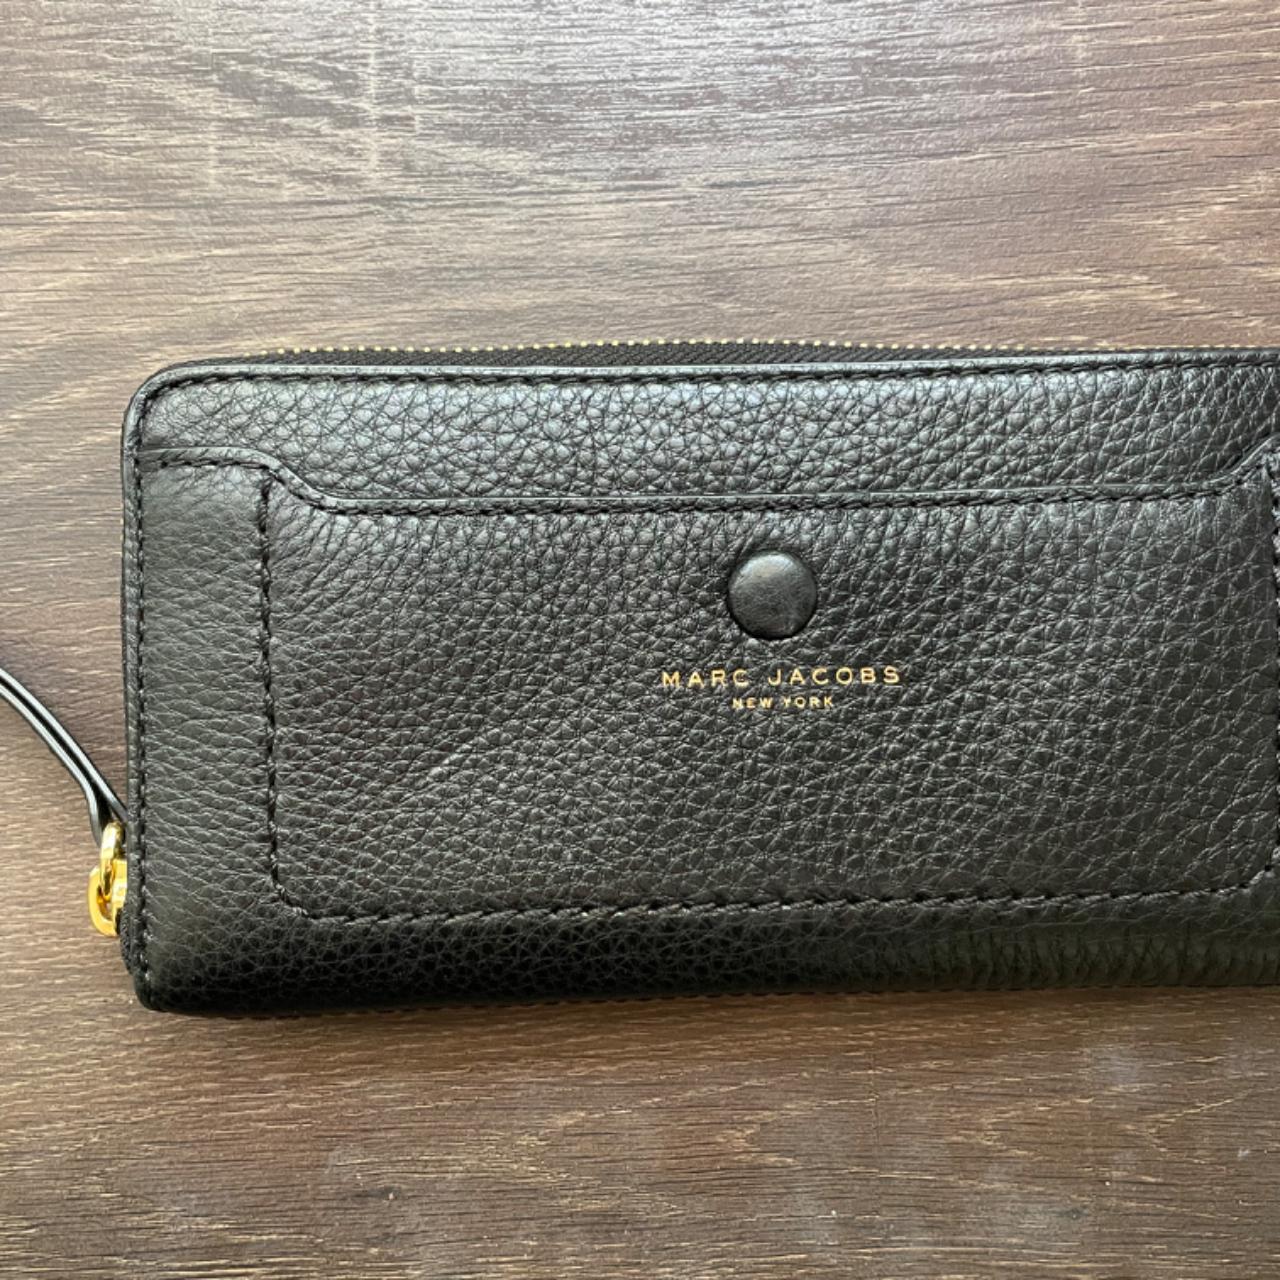 Spacious women's black wallet with gold zipper